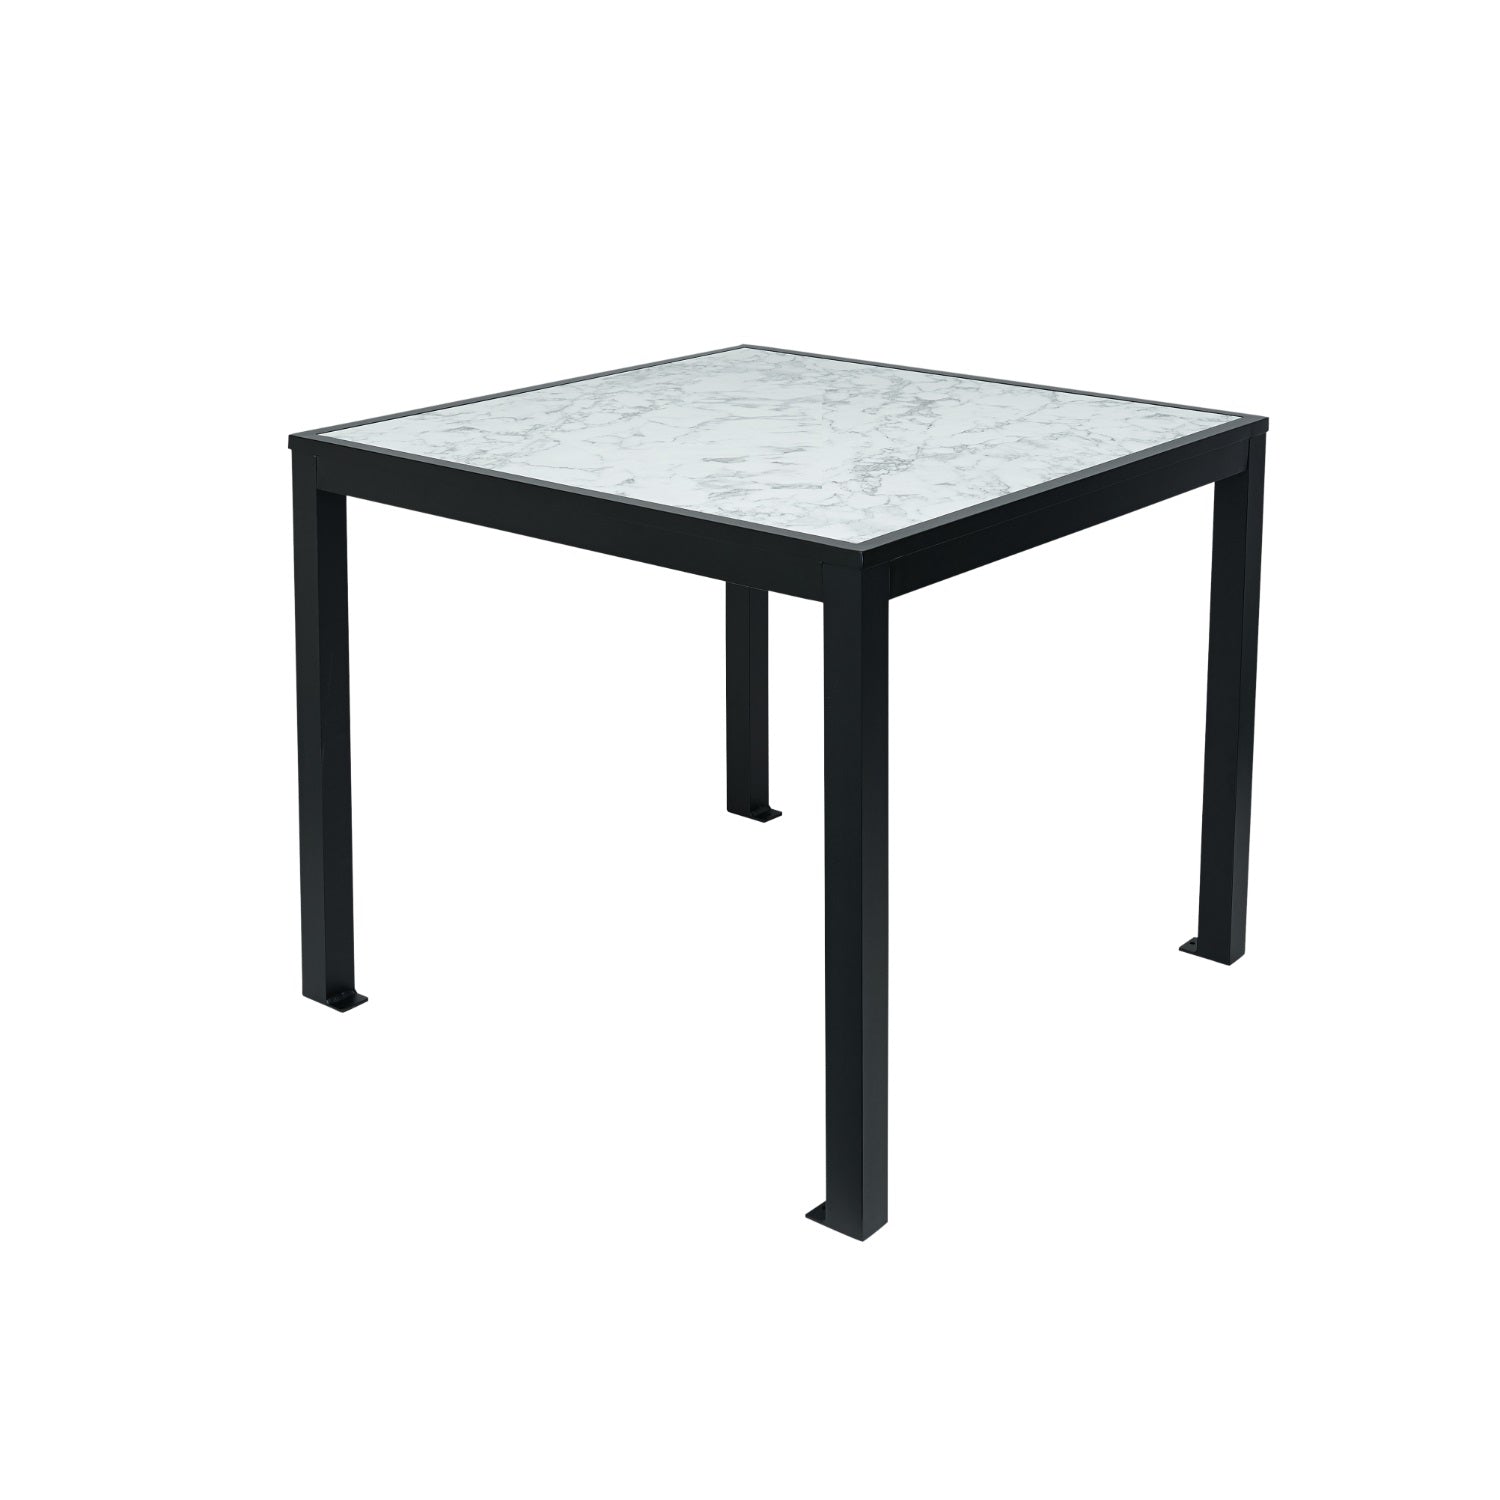 Surf Inlay Outdoor/Indoor 36" Square Aluminum 4-Leg Bolt-Down Dining Height Table with Laminate Inlay Top